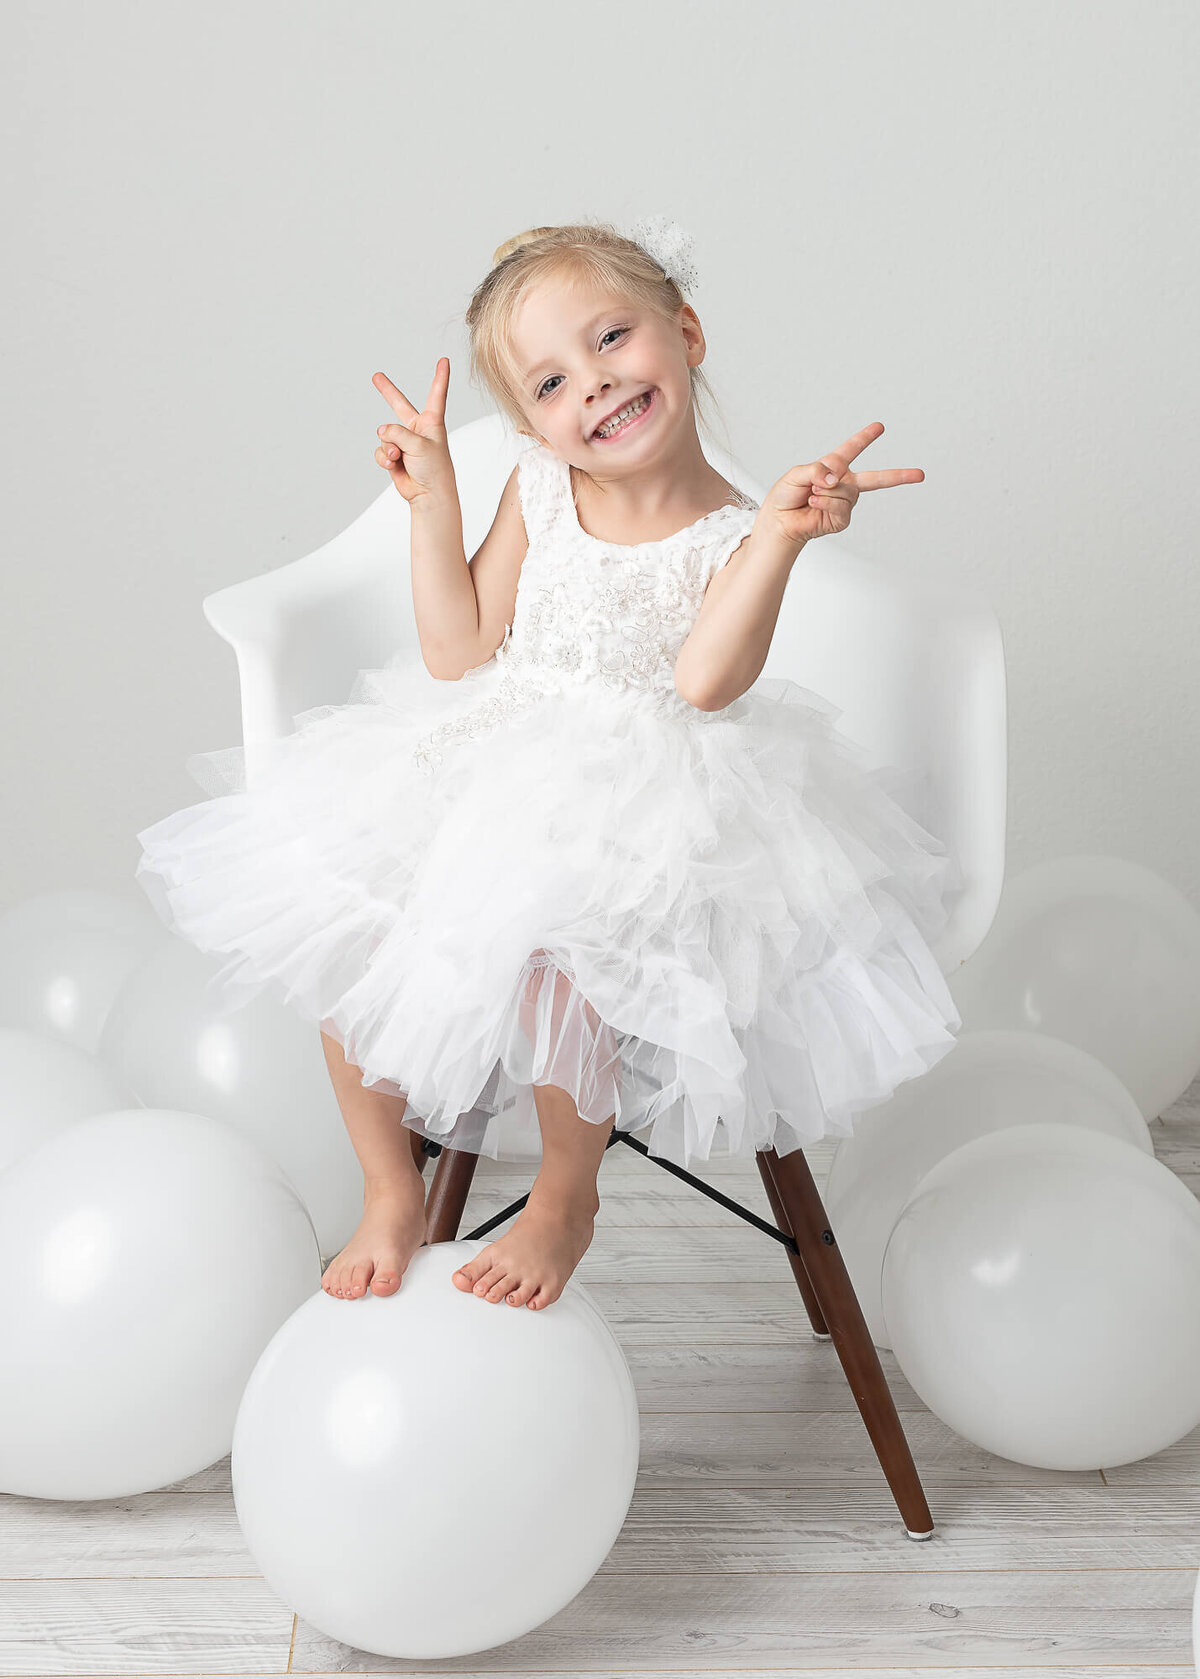 girl in tutu sitting on eames chair with balloons surrounding her